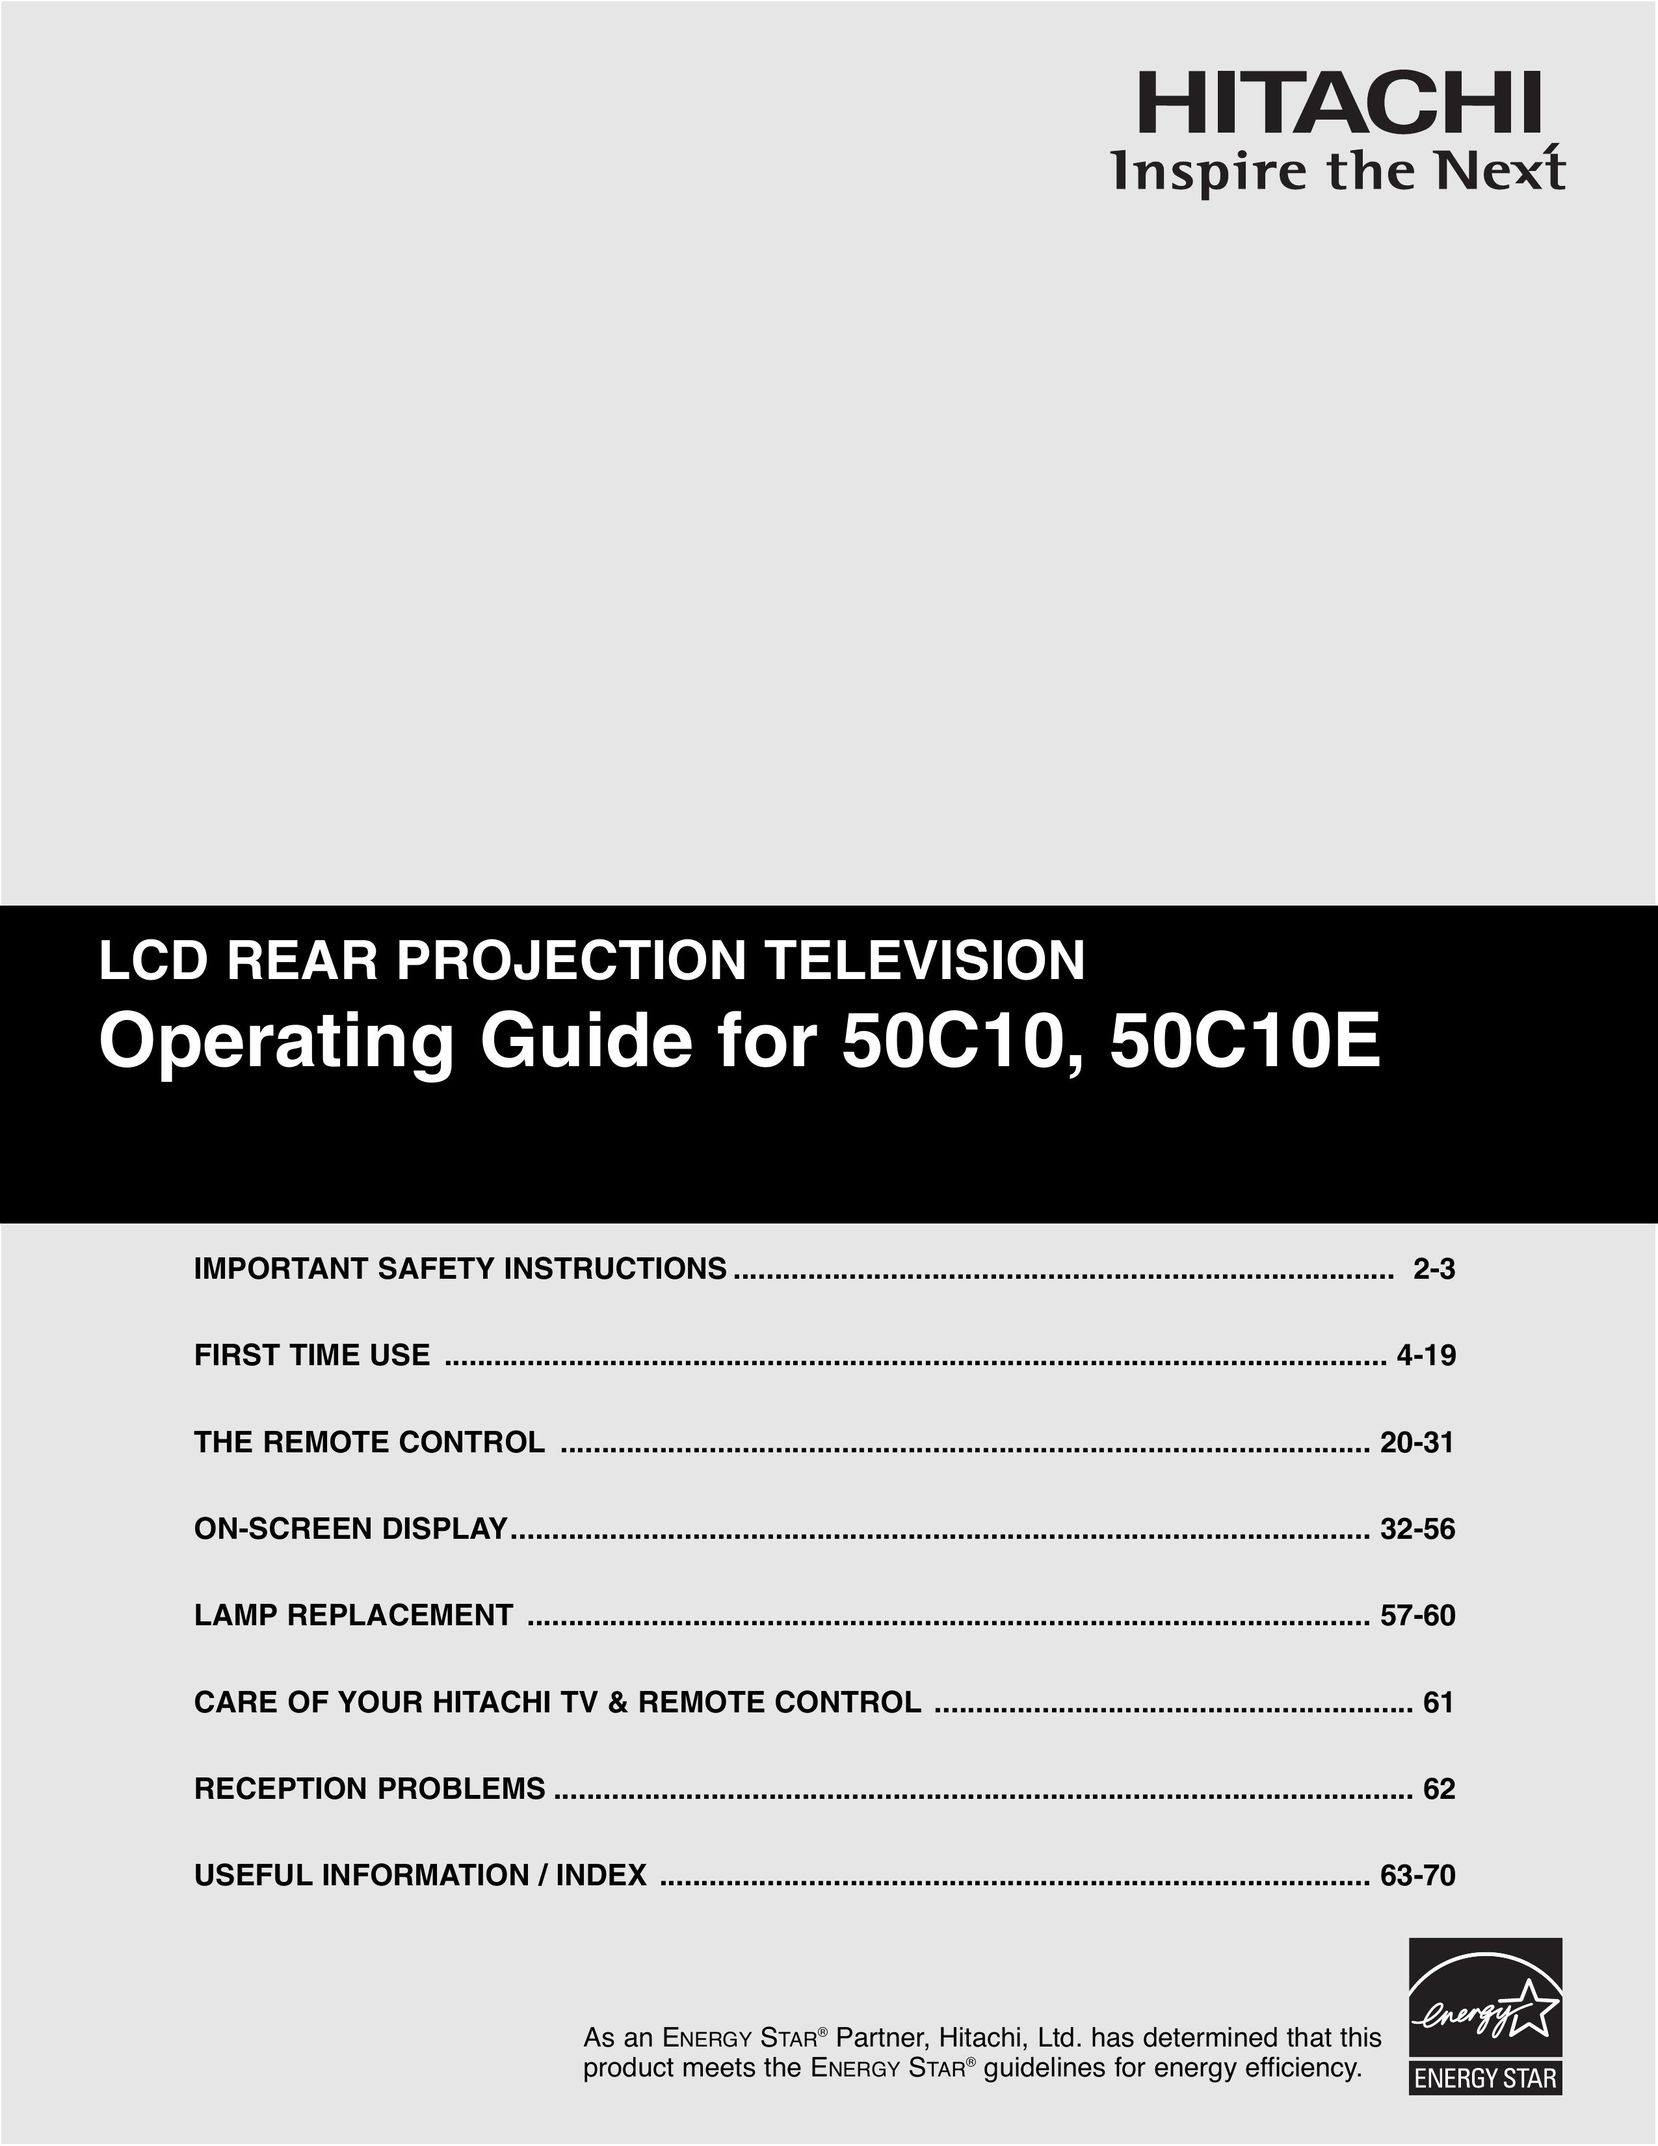 Hitachi 50C10 Projection Television User Manual